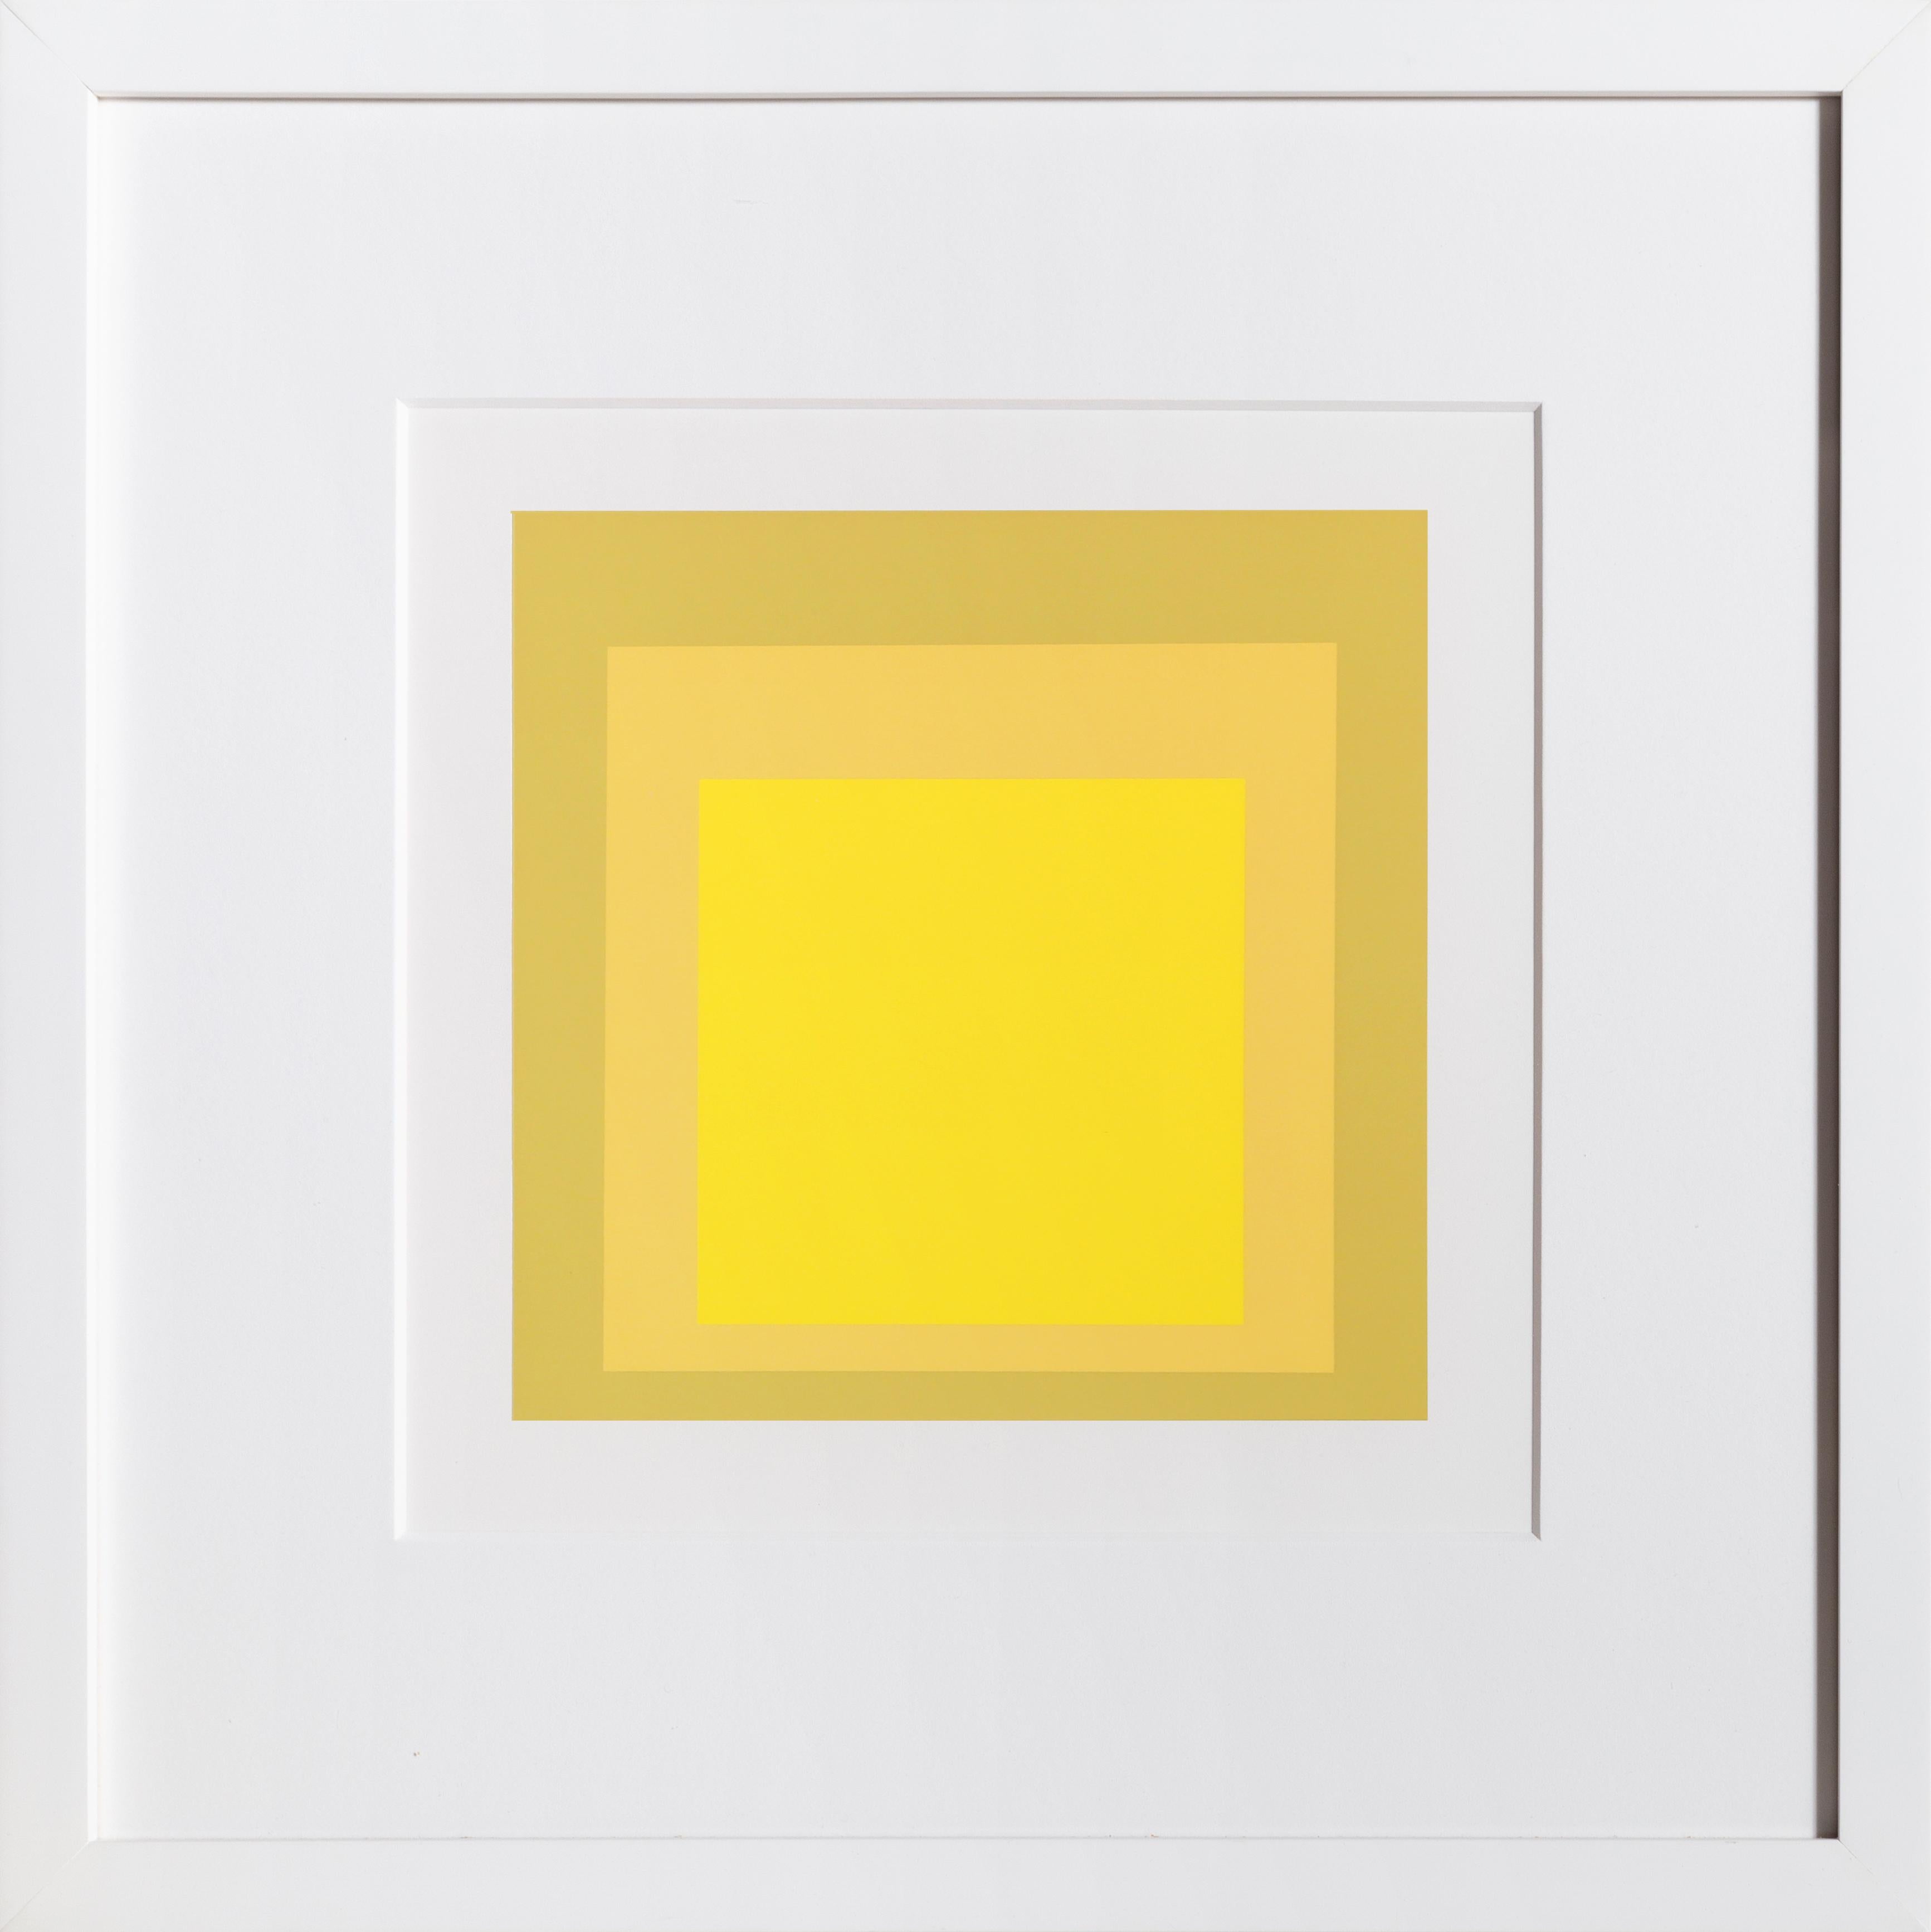 Abstract Print Josef Albers - Hommage au carré - P2, F24, I2